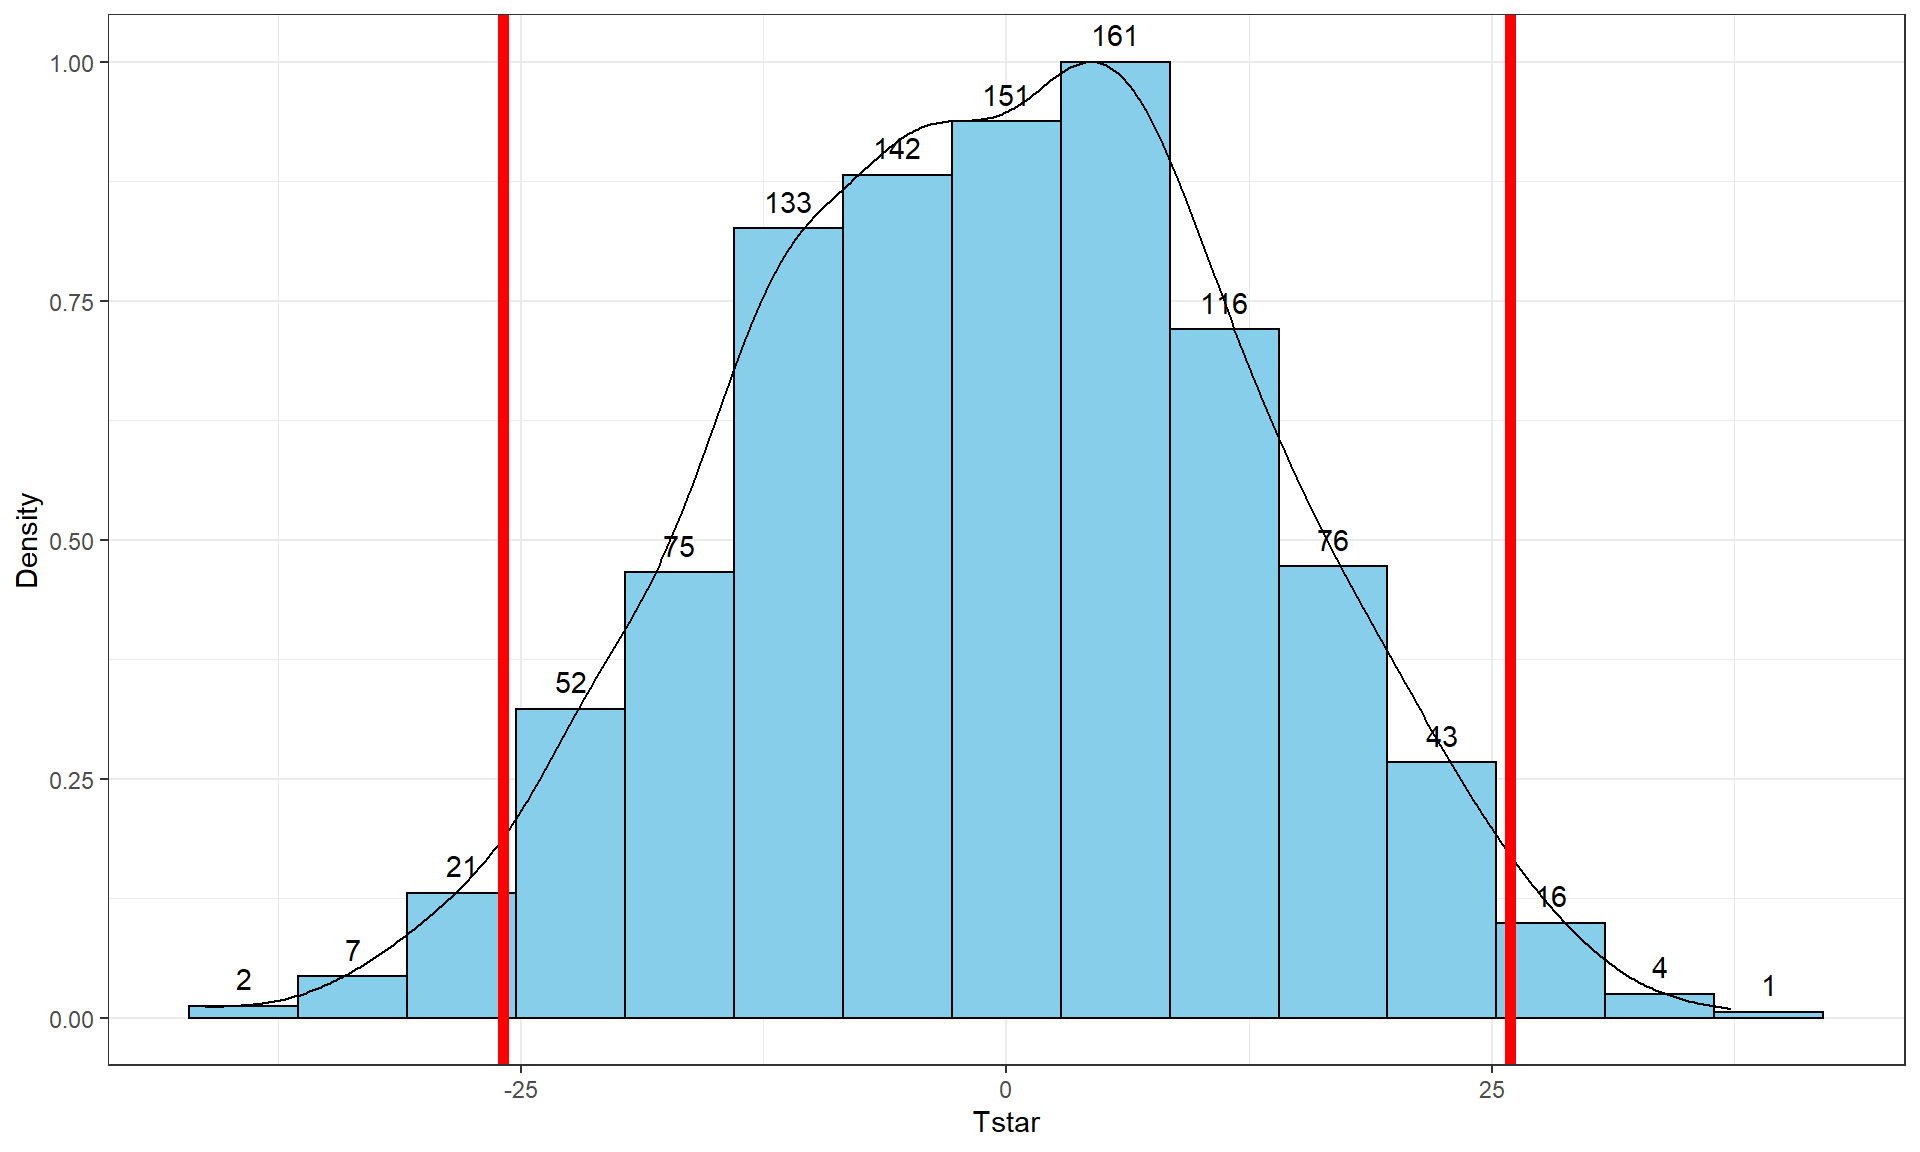 Histogram and density curve of values of test statistic for 1,000 permutations with bold lines for value of observed test statistic (-25.933) and its opposite value (25.933) required for performing the two-sided test.